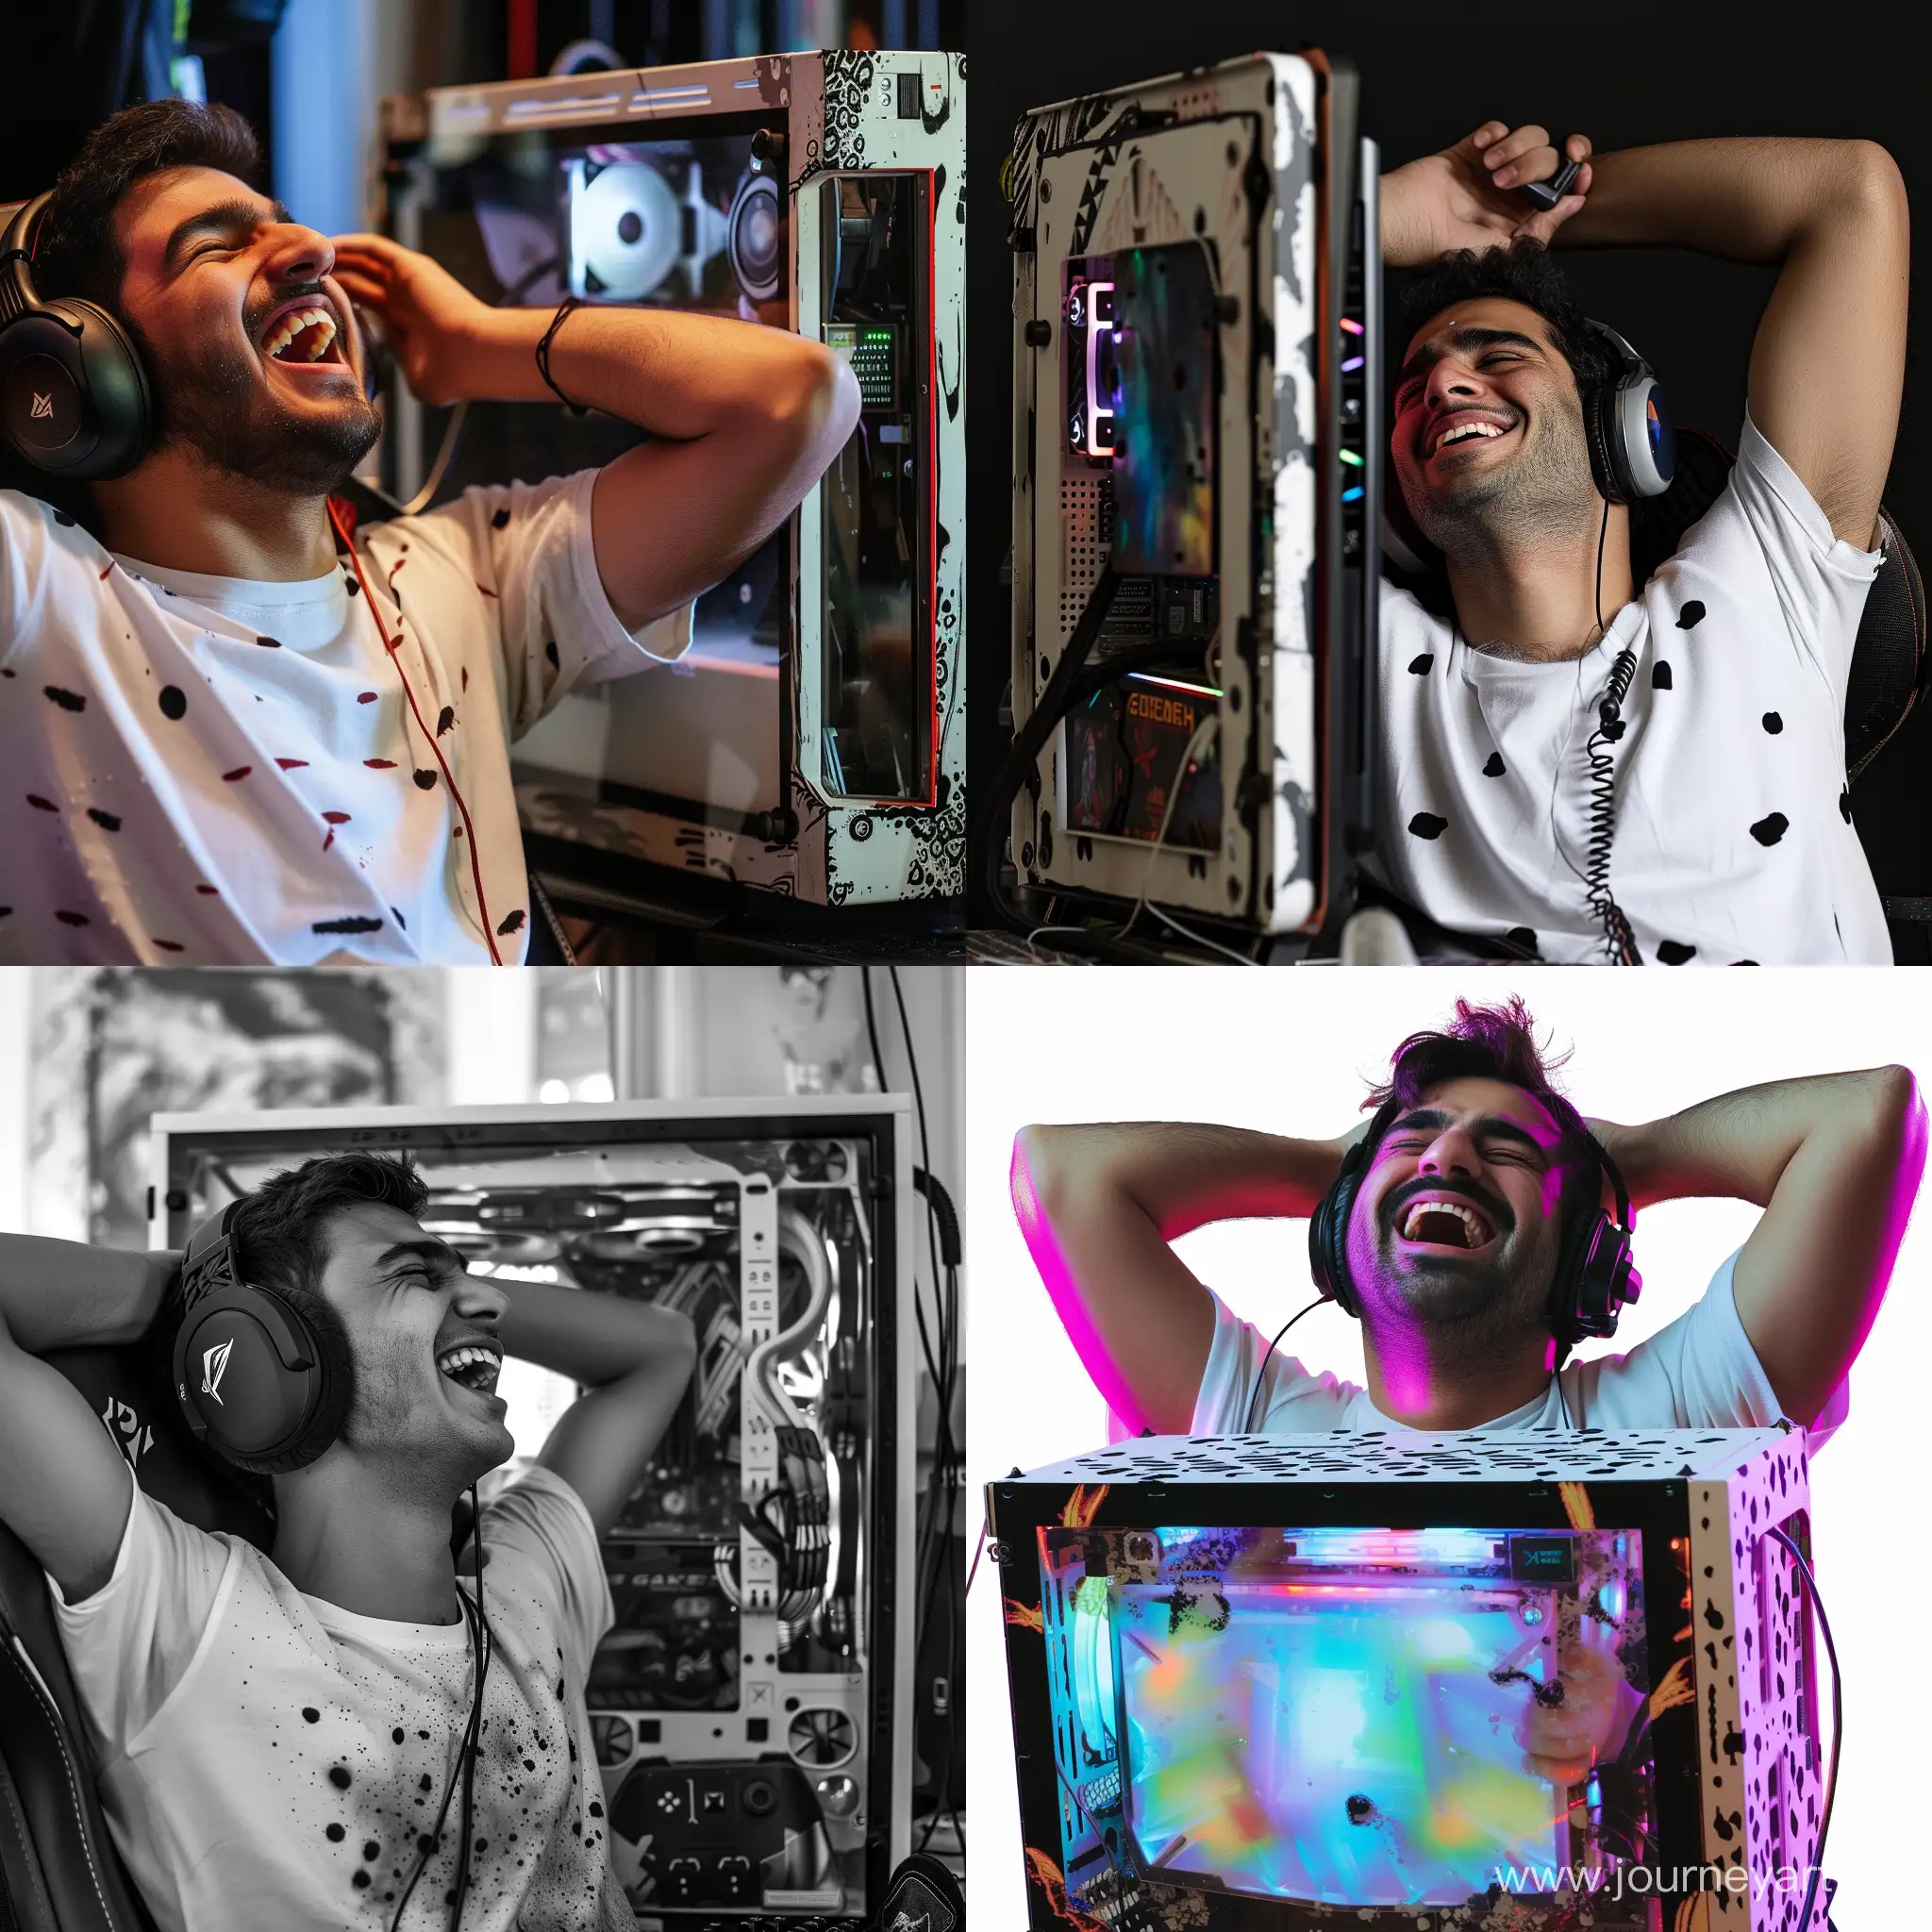 An Iranian gamer with headphones and a gaming case with a bent monitor is laughing and his hands are resting behind his head. Also, this person is wearing a white t-shirt with black spots on it.